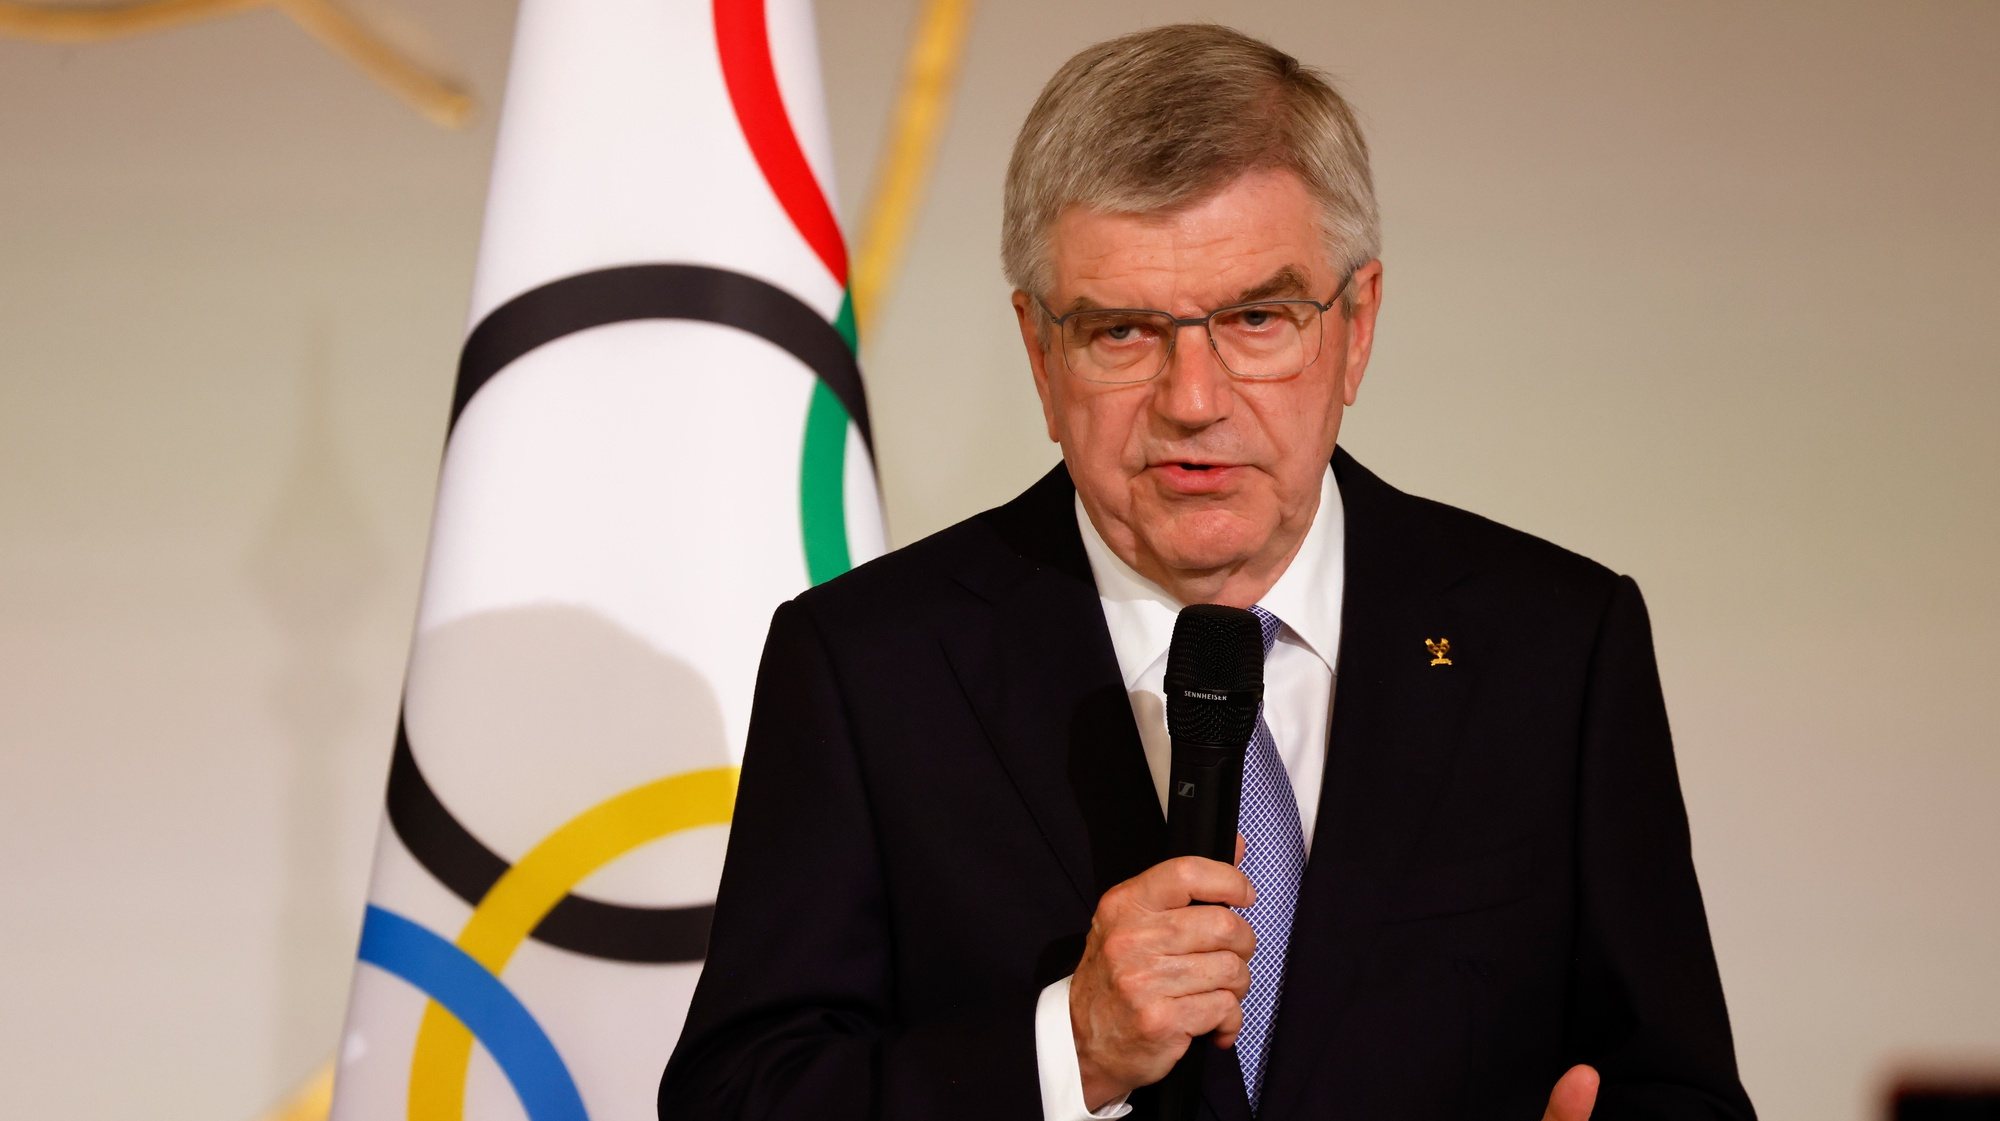 epa11491626 International Olympic Committee (IOC) President Thomas Bach gestures as he delivers a speech during a reception for international journalists accredited for the Paris 2024 Olympic Games, at the Elysee Presidential Palace, in Paris, France, 22 July 2024, ahead of Paris 2024 Olympic and Paralympic games.  EPA/LUDOVIC MARIN / POOL  MAXPPP OUT